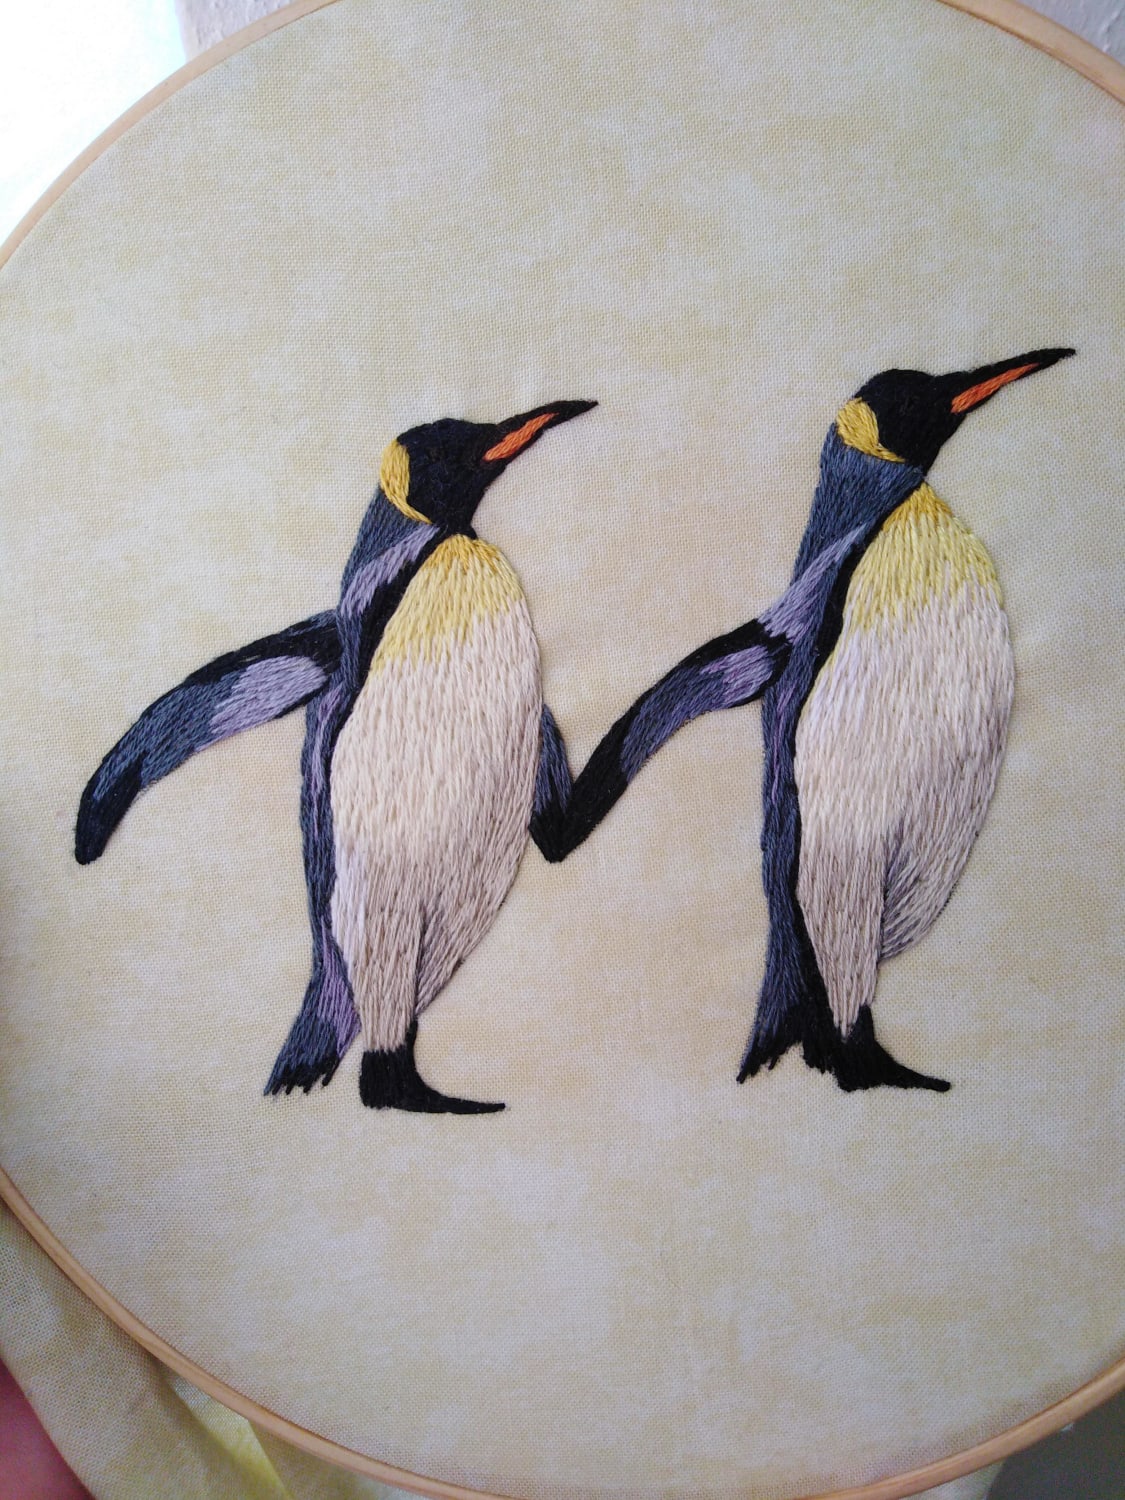 these two embroidered penguins